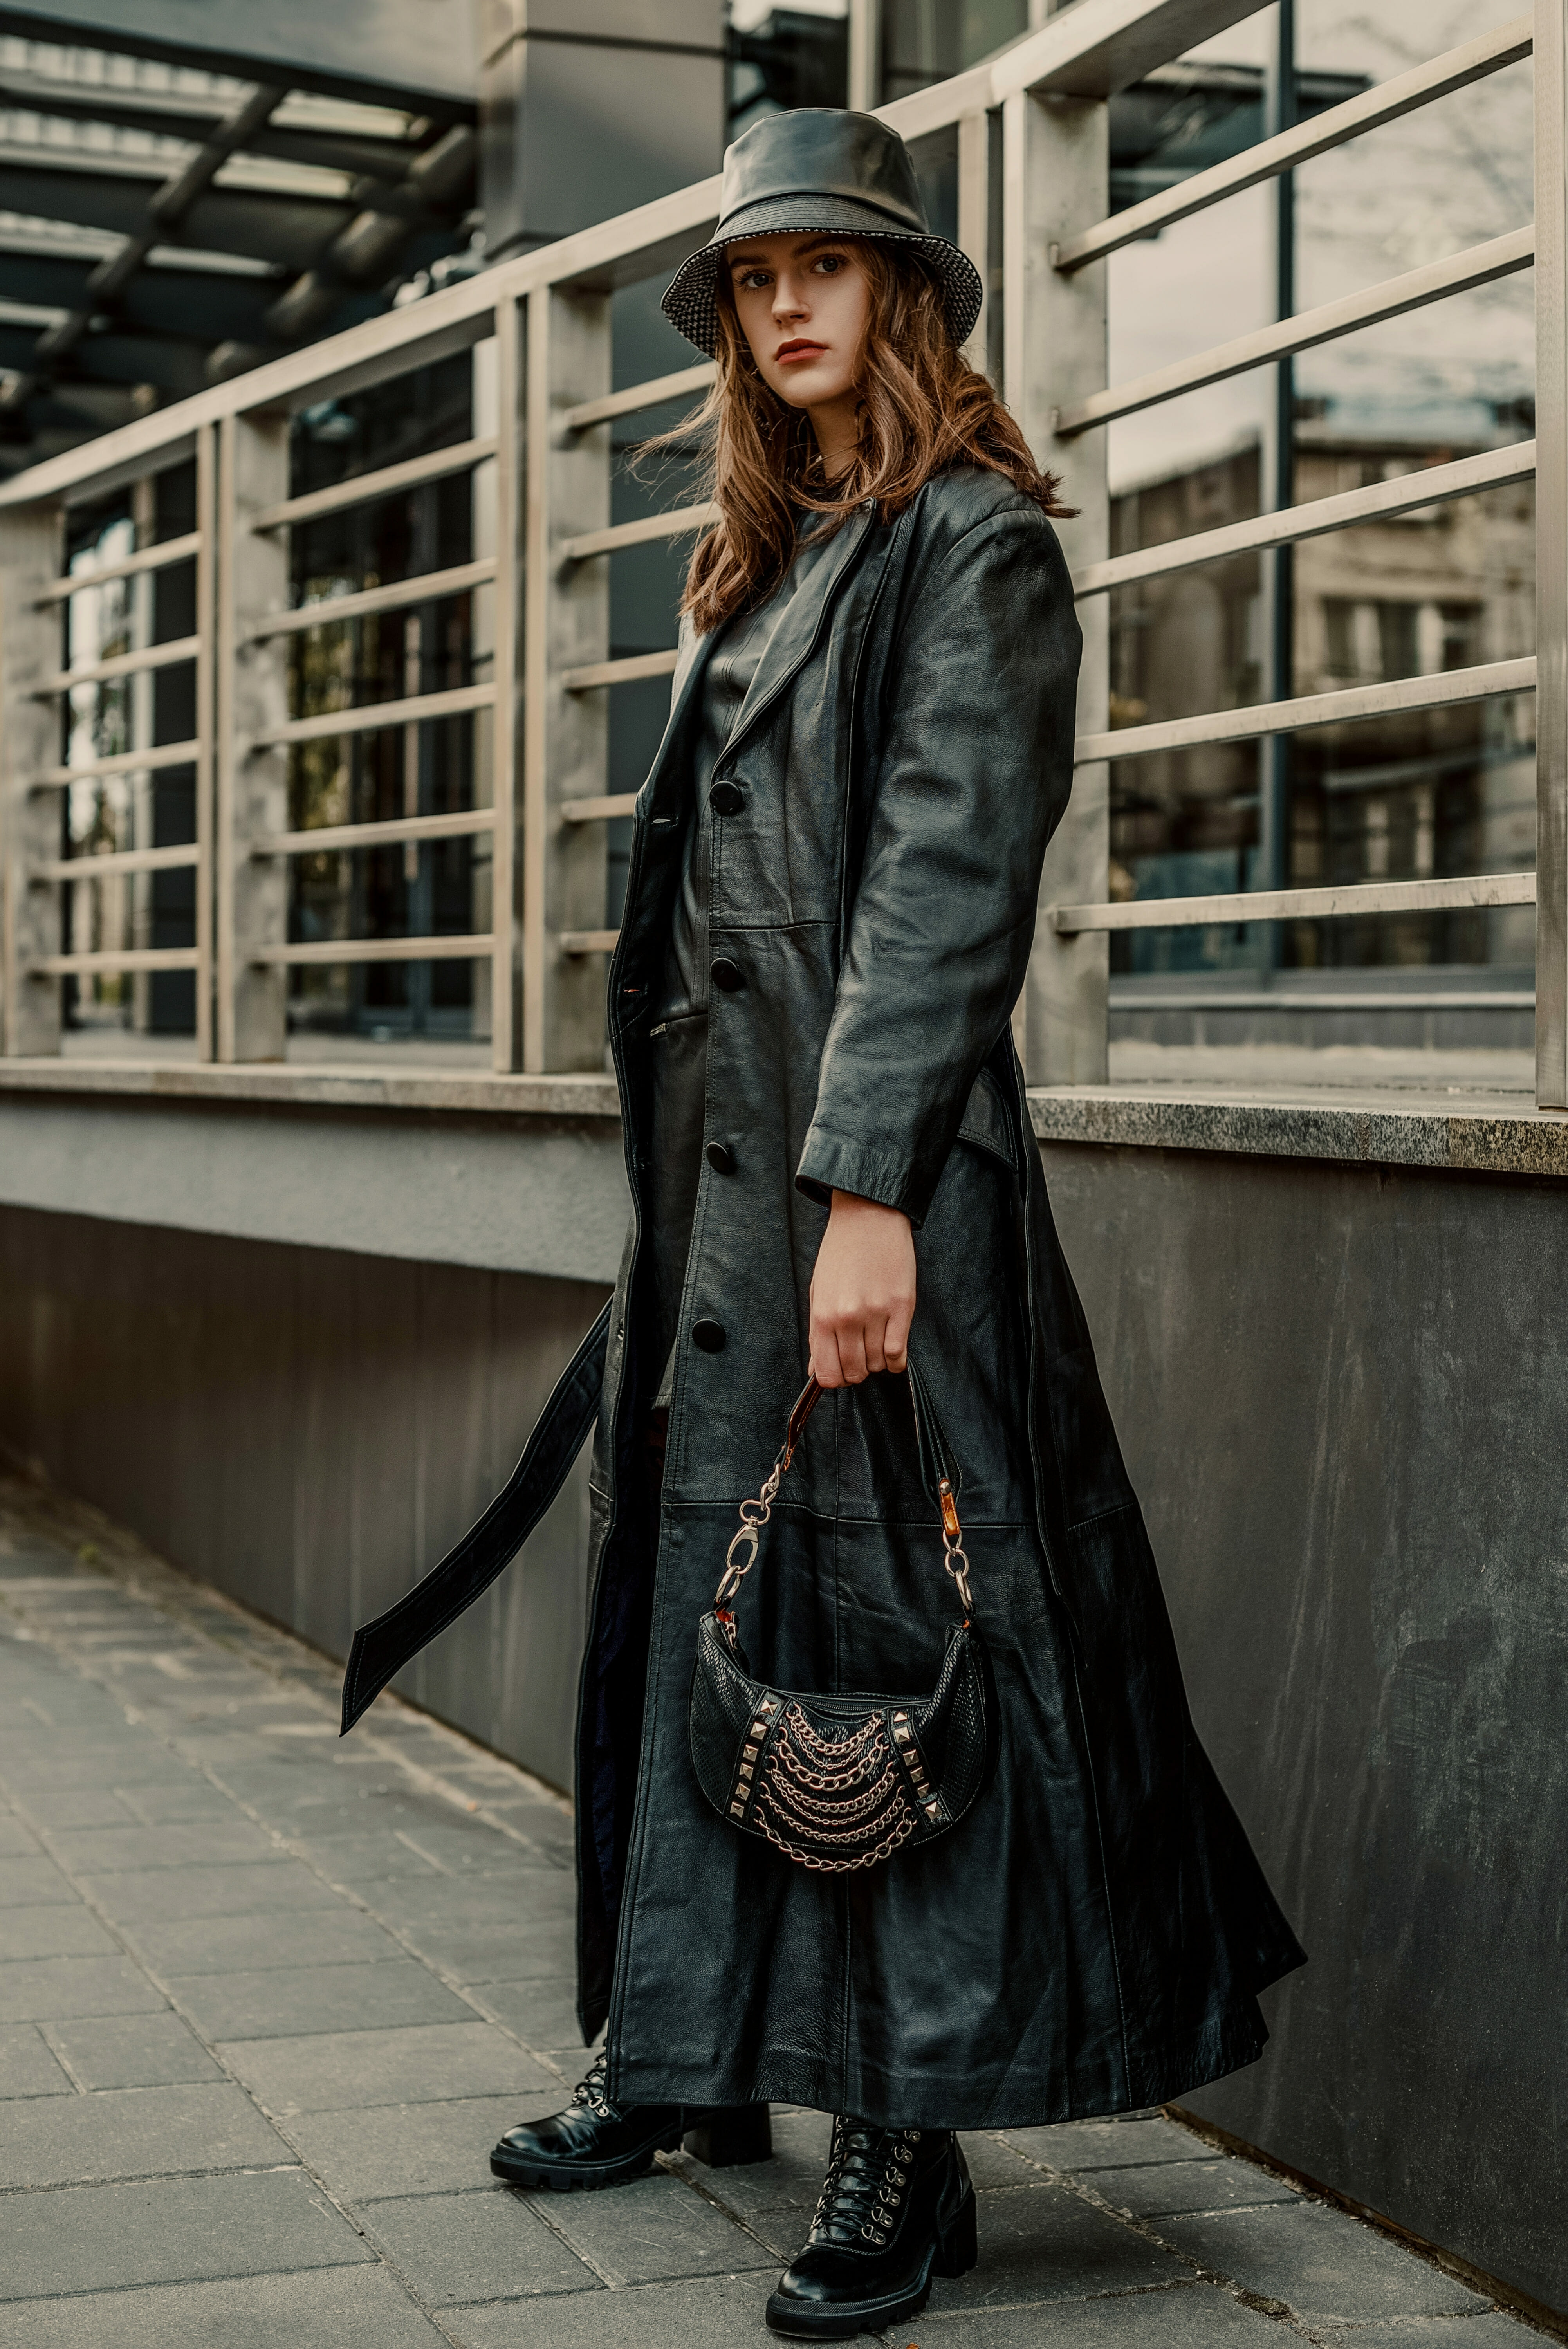 Outdoor full-length fashion portrait of young confident woman wearing long black leather trench coat, bucket hat, lace up ankle boots, holding trendy small handbag, posing in city street